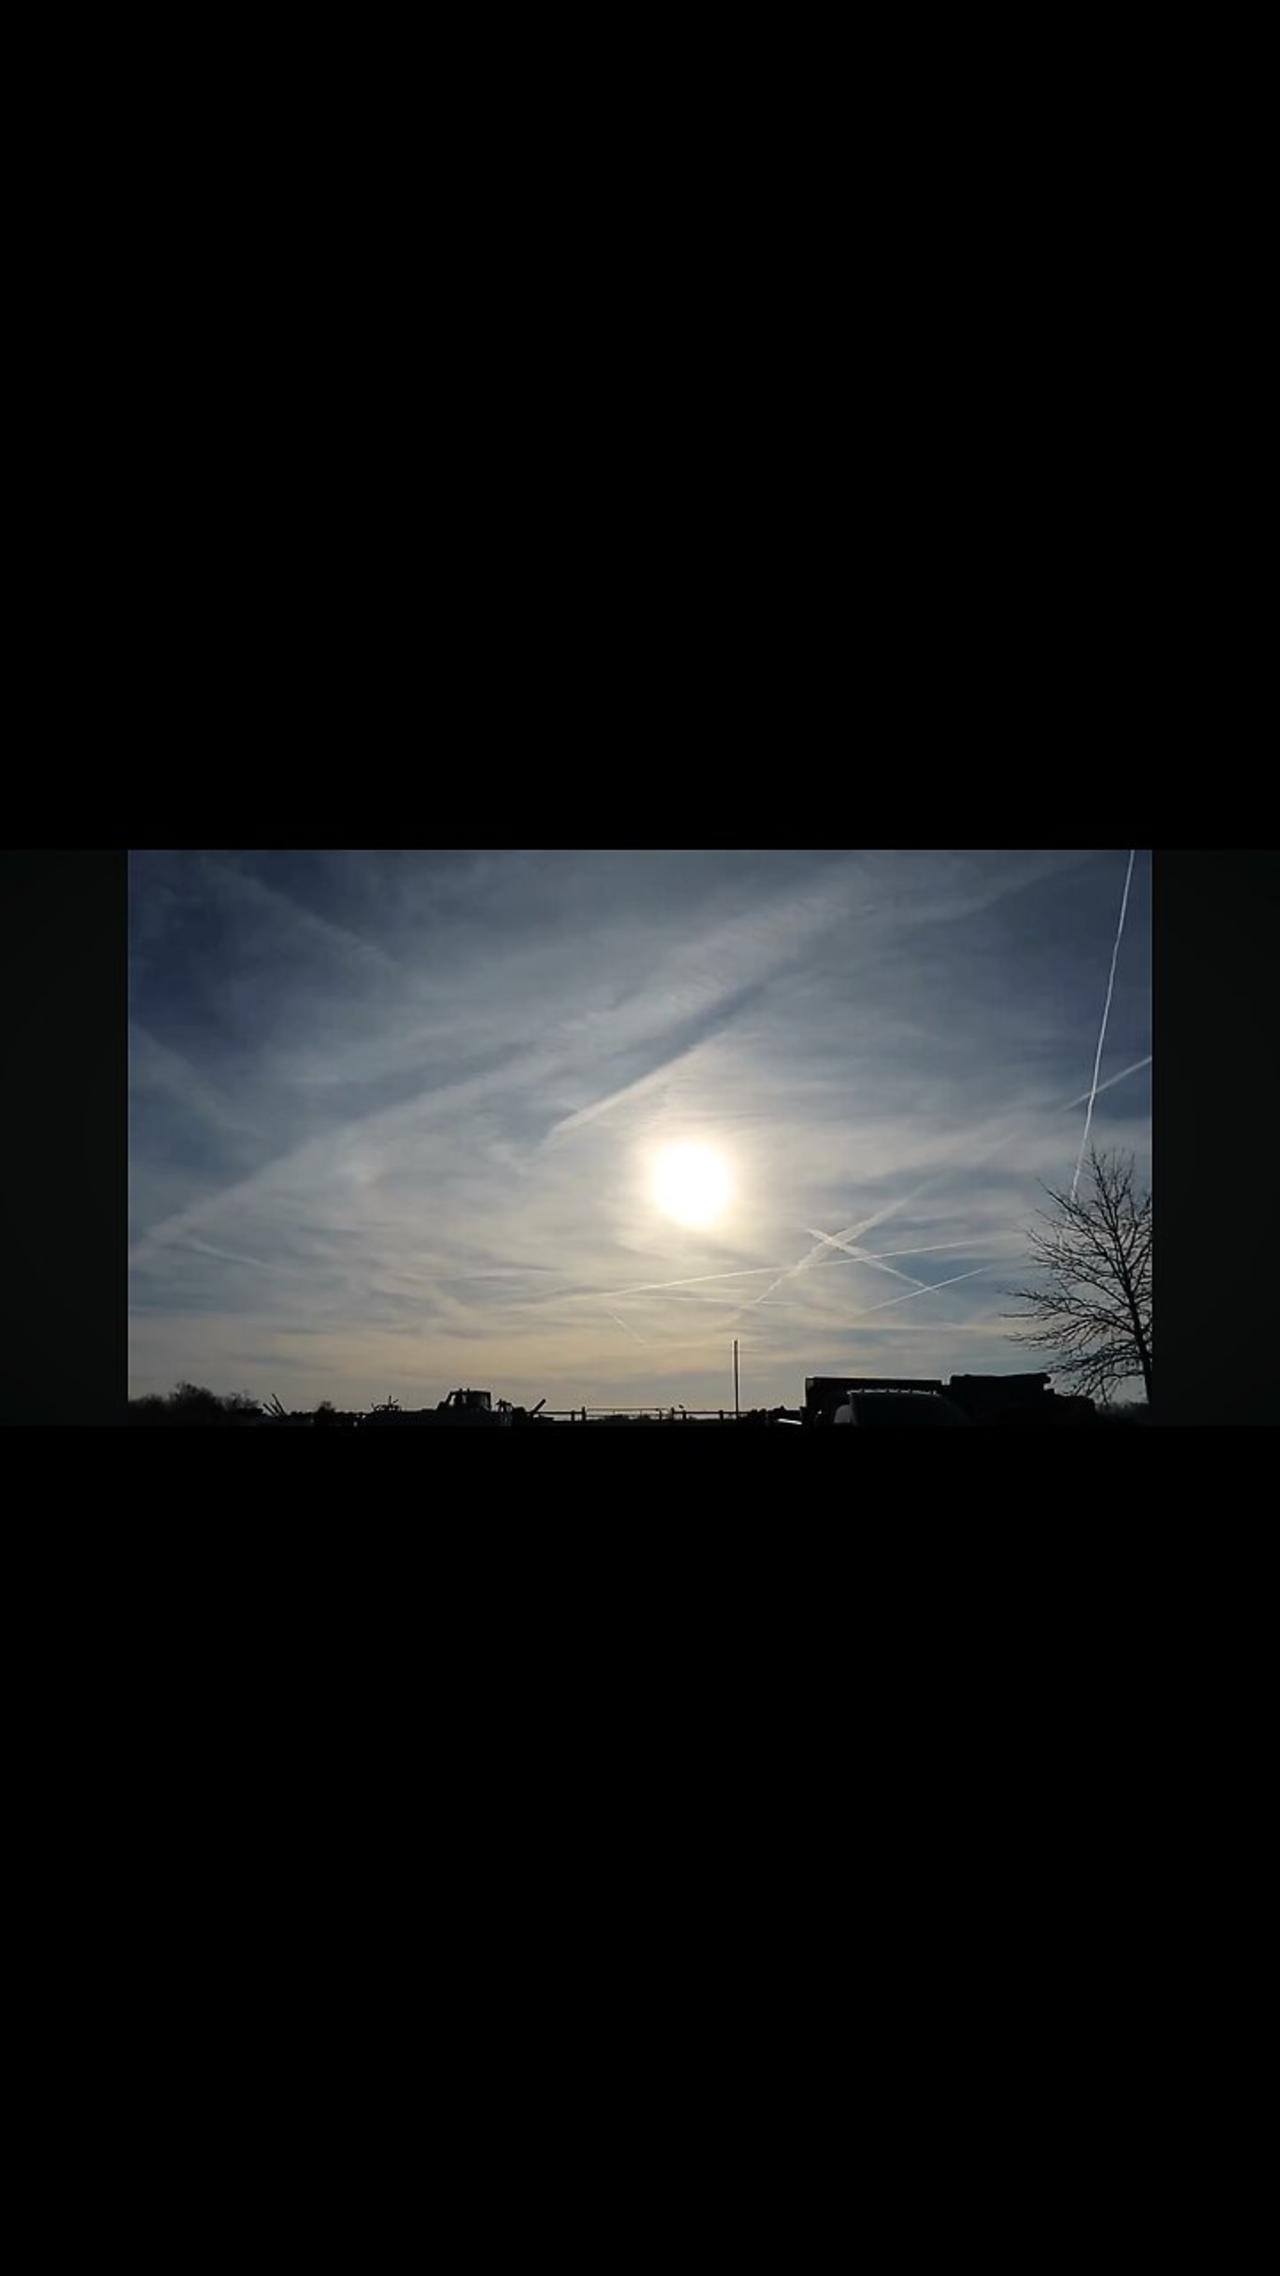 How Chemtrails Are Causing Severe Health Problems & More